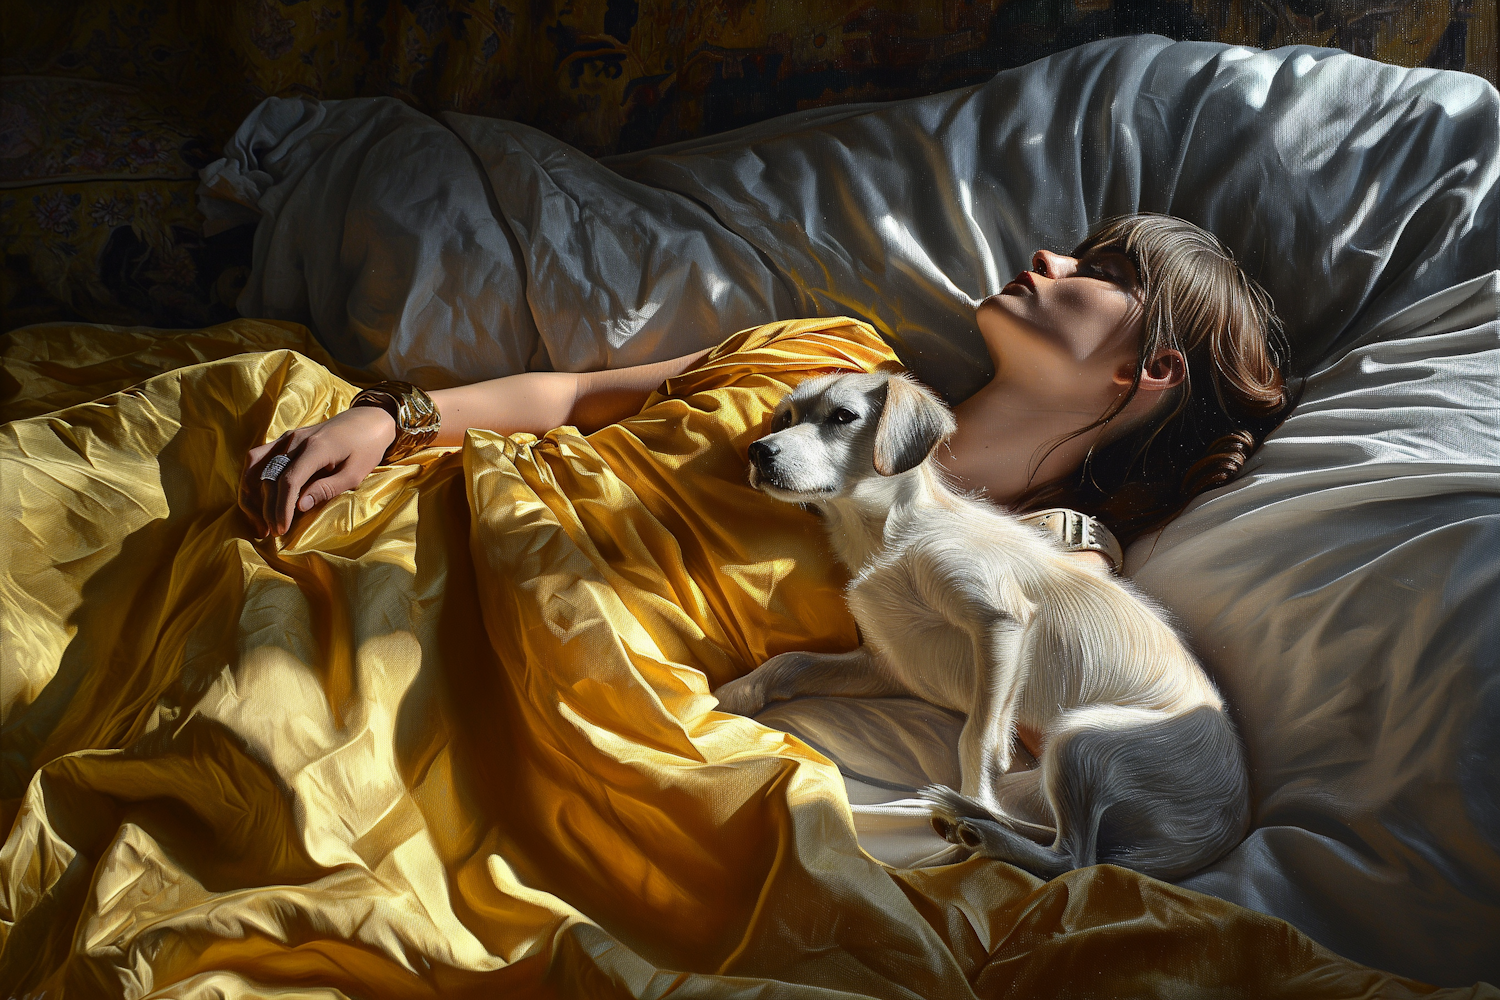 Serenity in Satin: A Woman's Repose with Her Loyal Companion